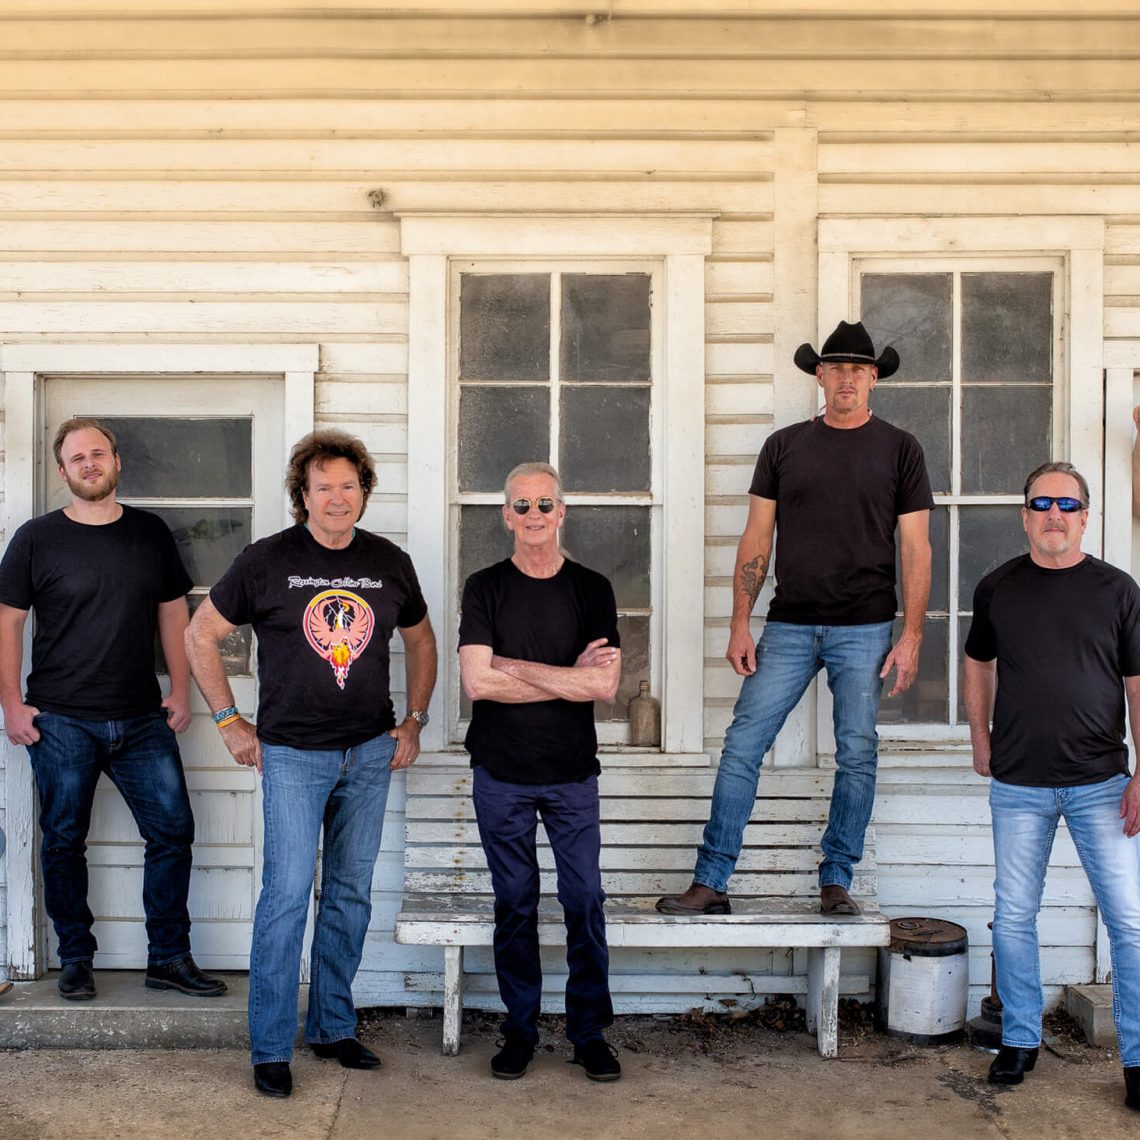 OUTLAWS  – New album Dixie Highway out on 28 February 2020 – USA Tour dates for 2020 announced